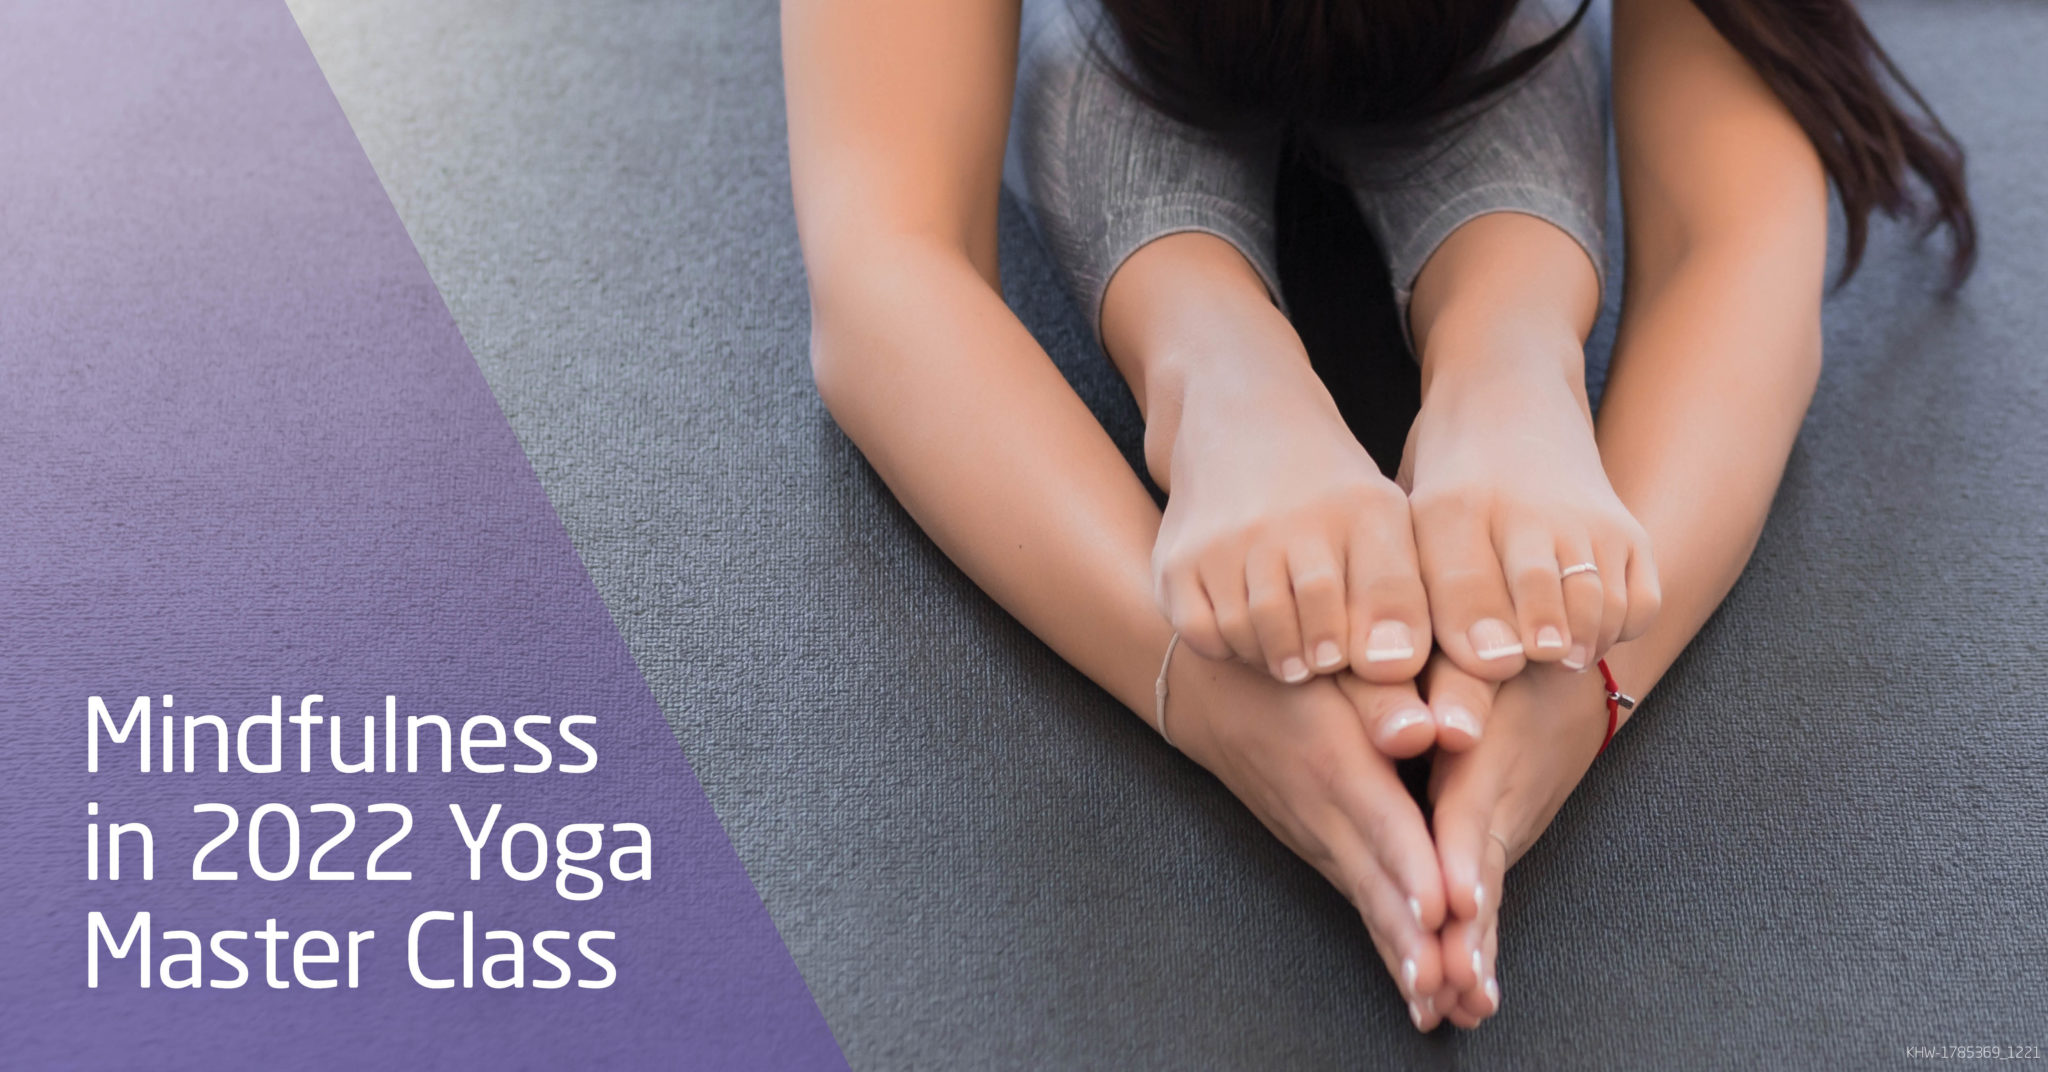 Mindfulness in 2022 Yoga Master Class